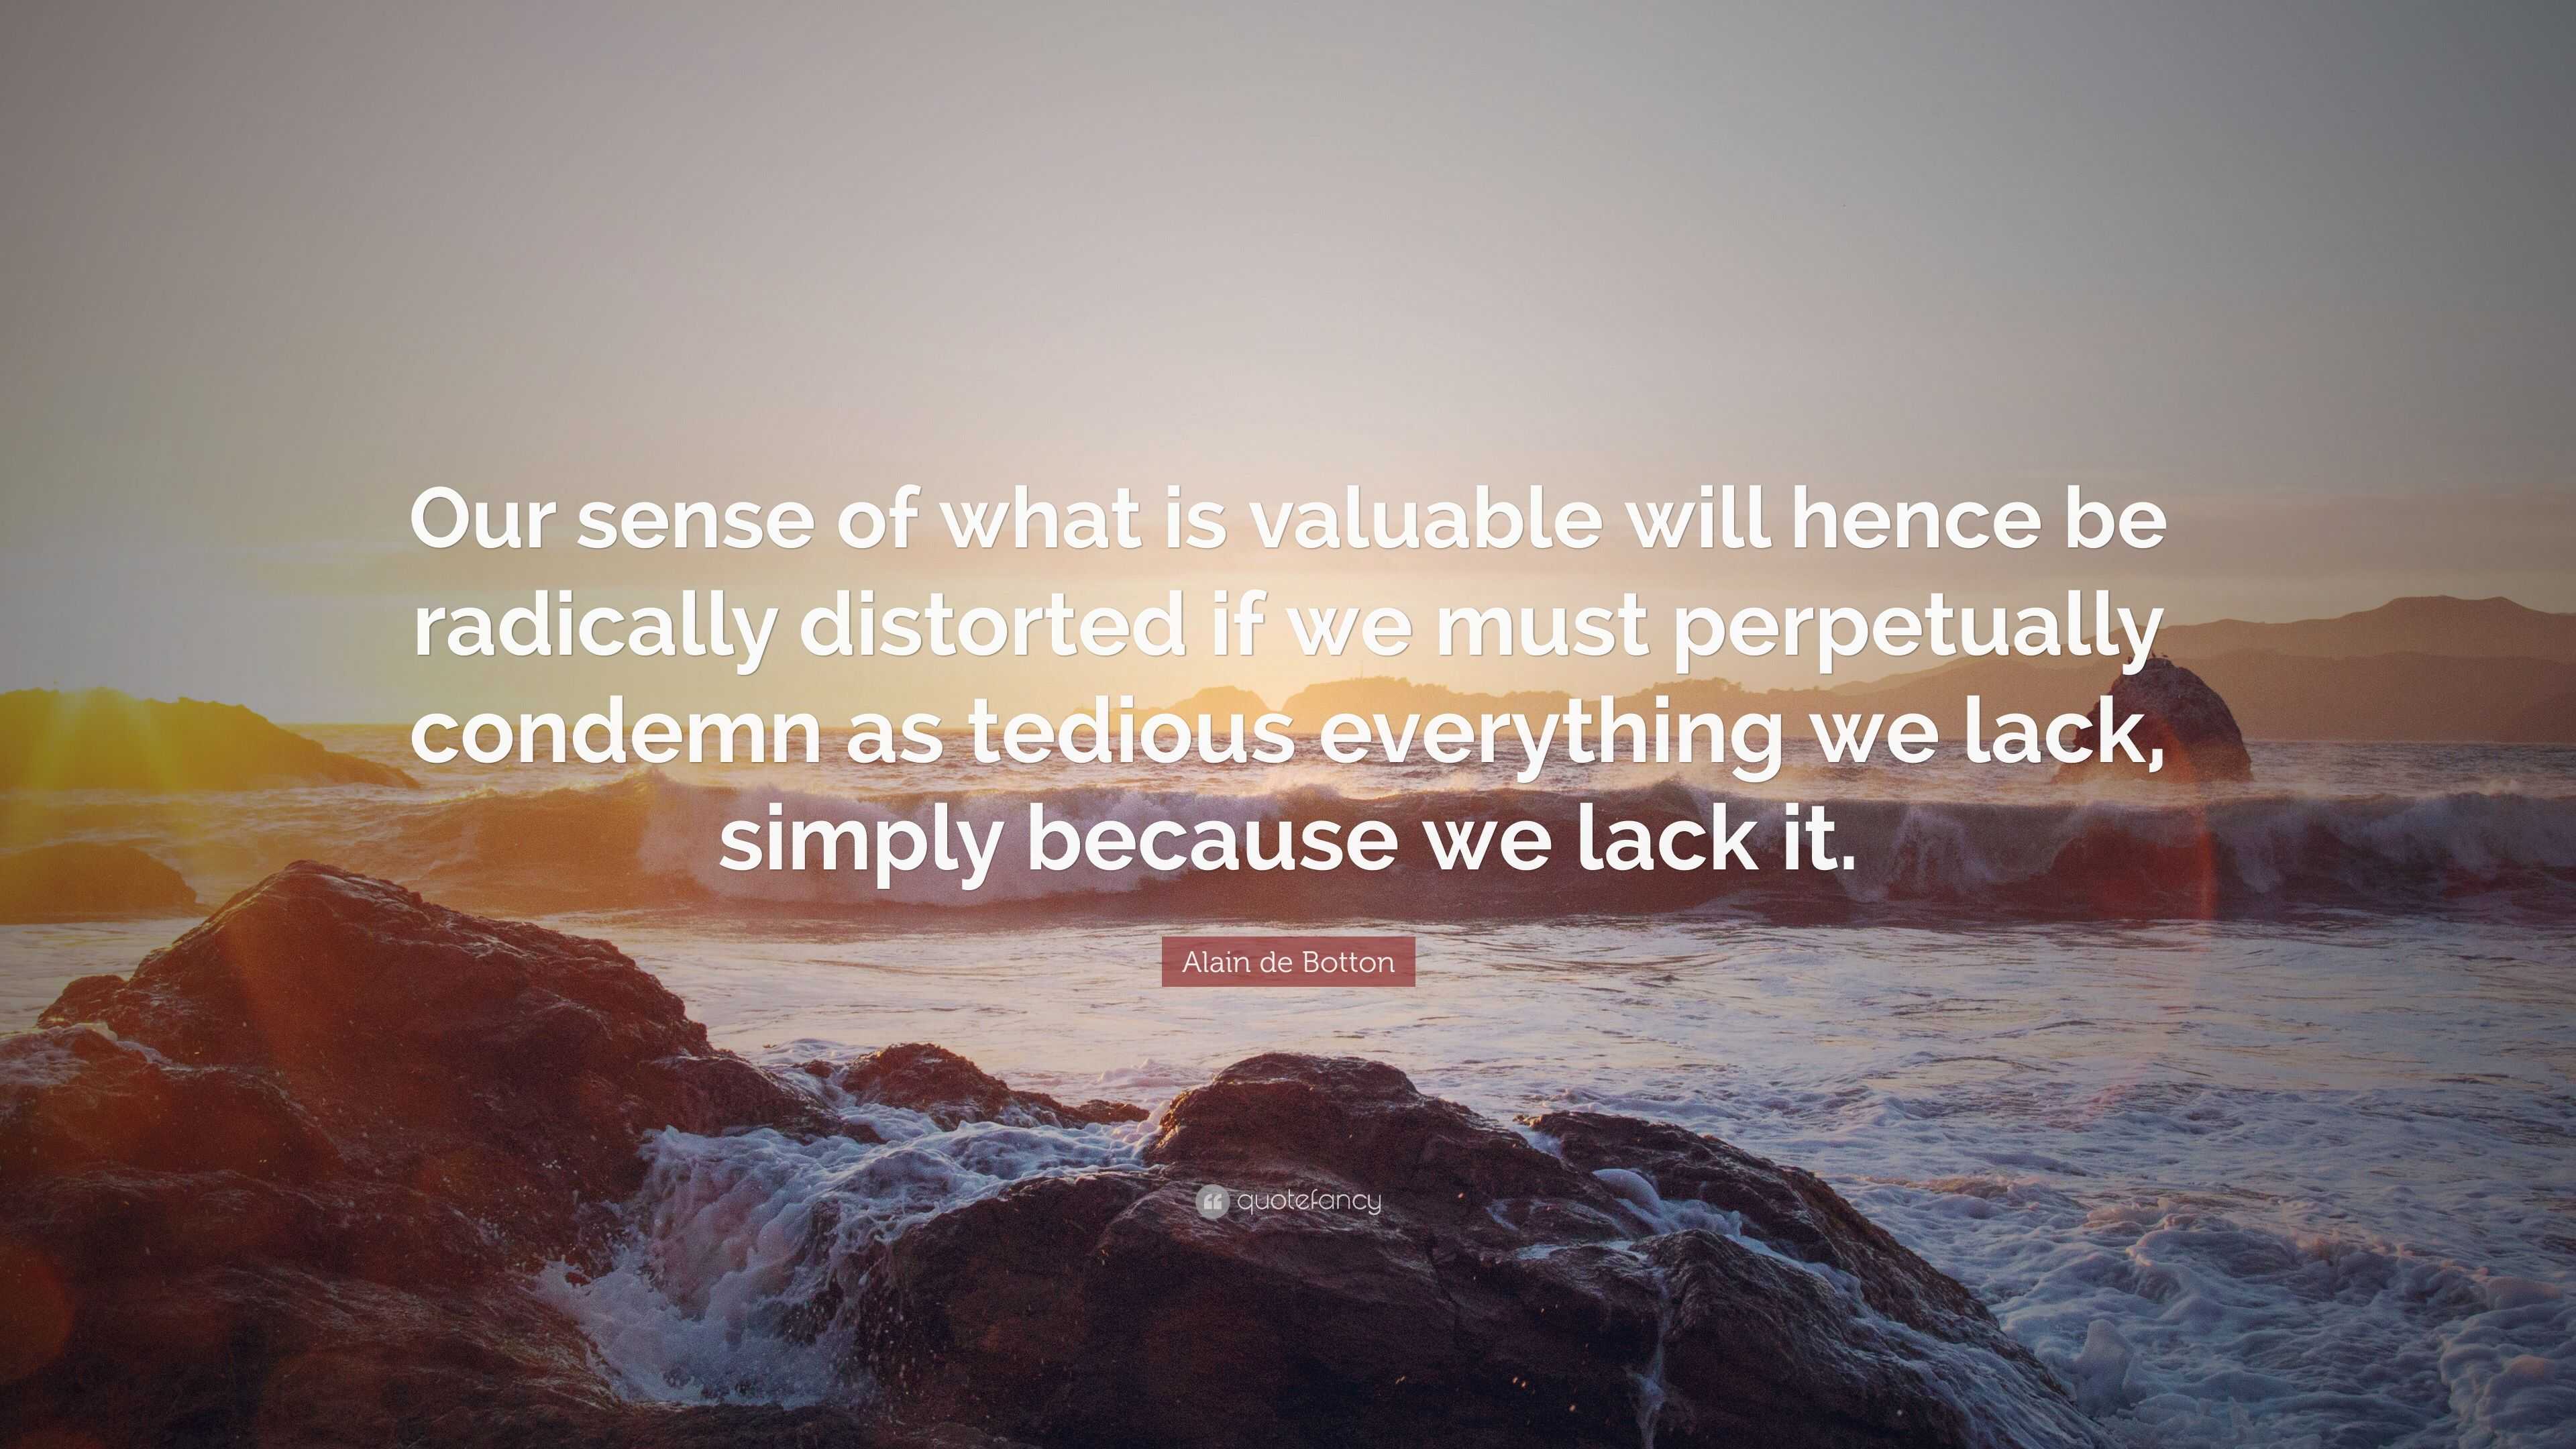 Alain de Botton Quote: “Our sense of what is valuable will hence be ...